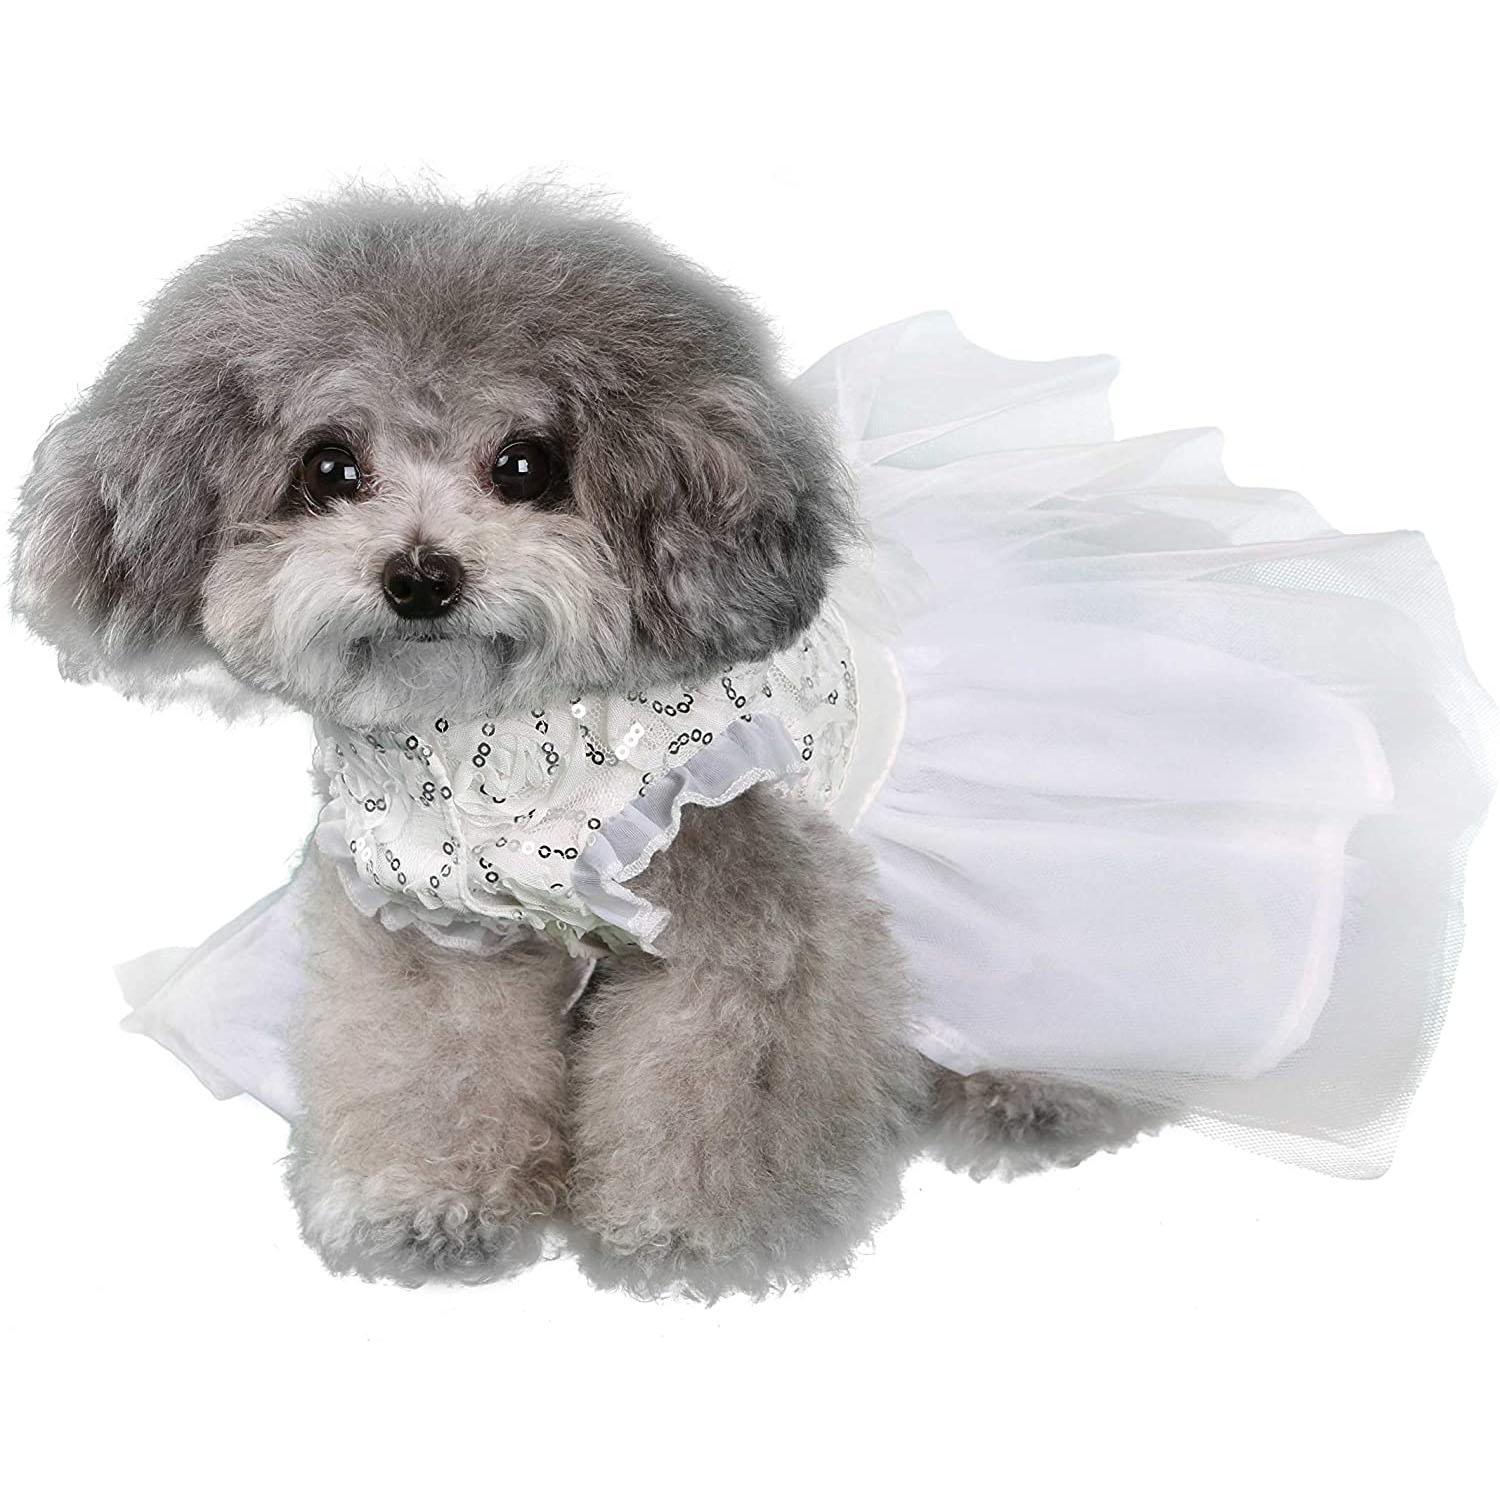 Pooch Outfitters Aurora Party Dog Dress - White